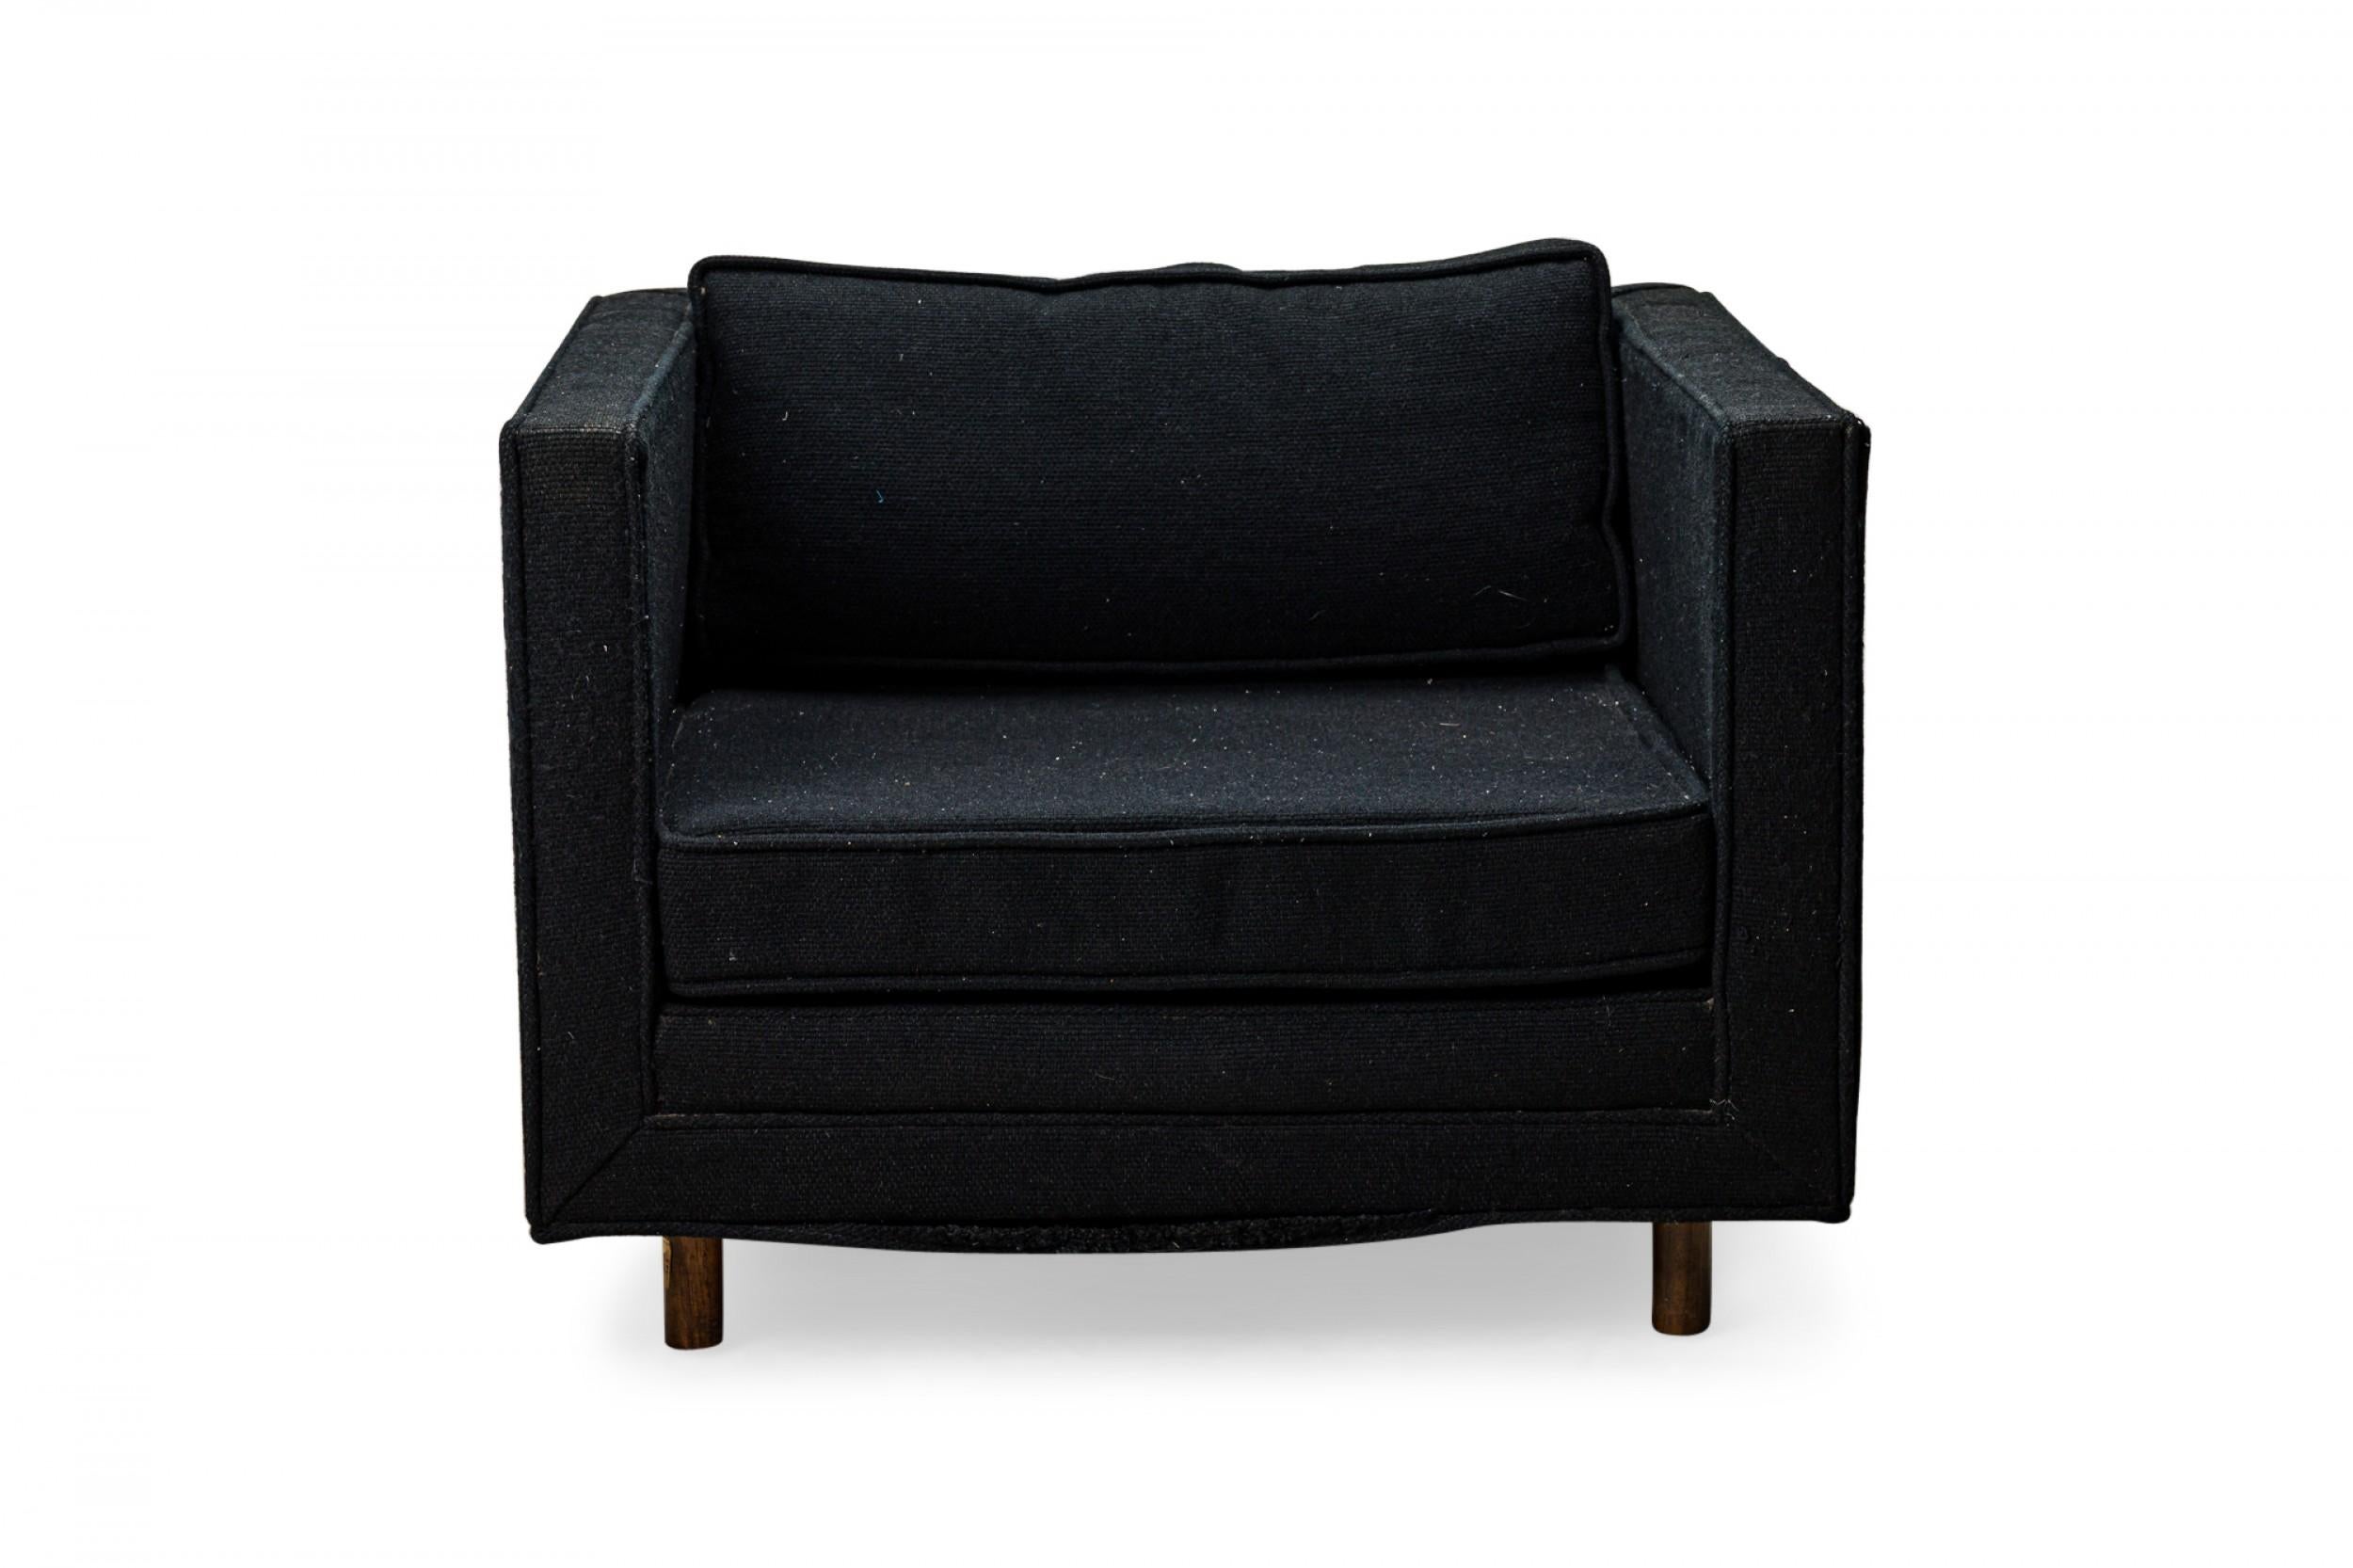 American Mid-Century cube form lounge / armchair with textured black fabric upholstery and a matching removable back cushion. (HARVEY PROBBER)(Available in black: DUF0509A).
 